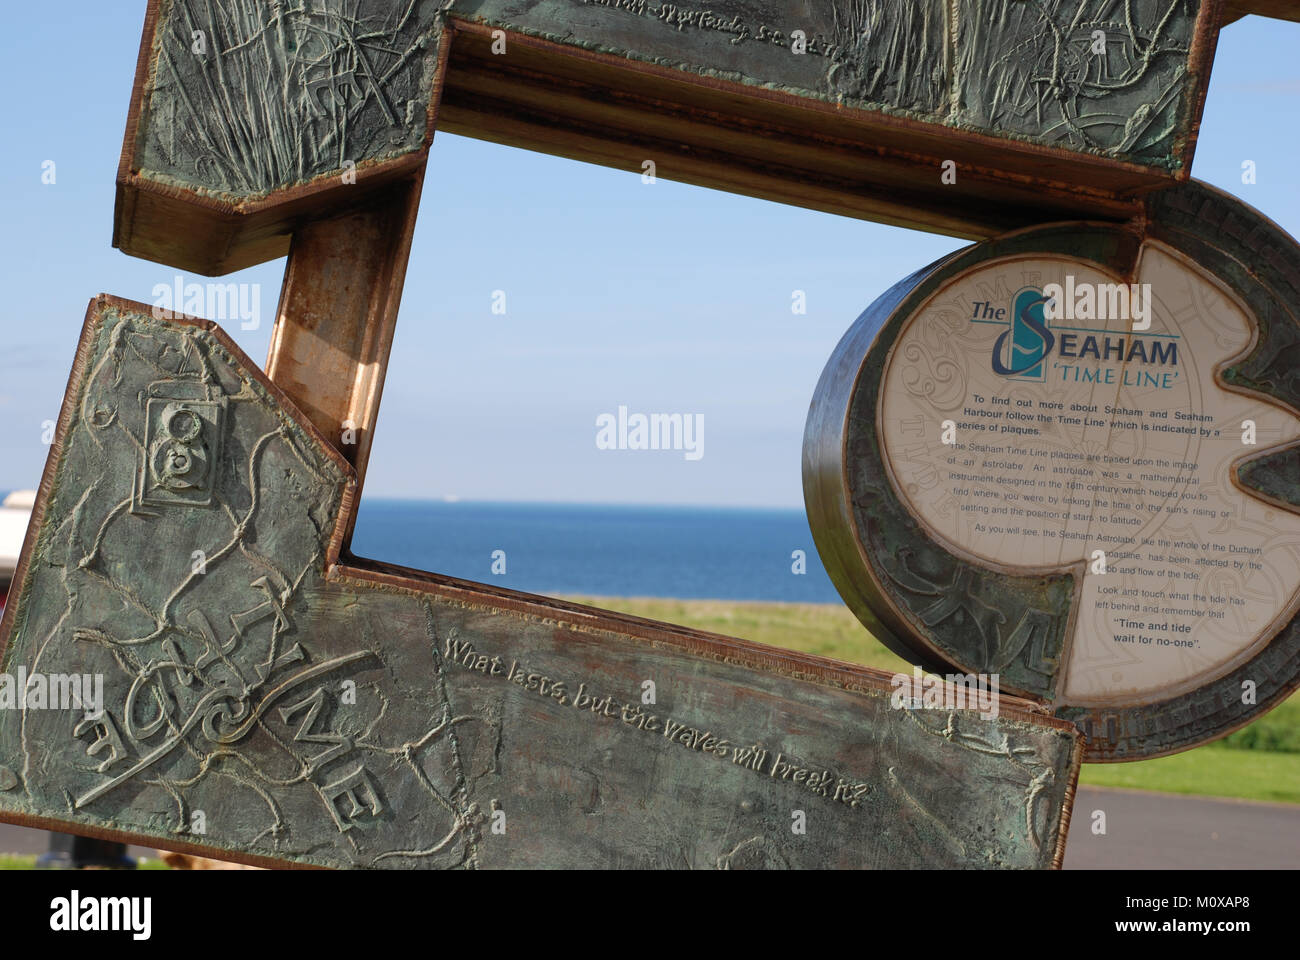 Time line sculpture atop the cliffs at Seaham in County Durham Stock Photo